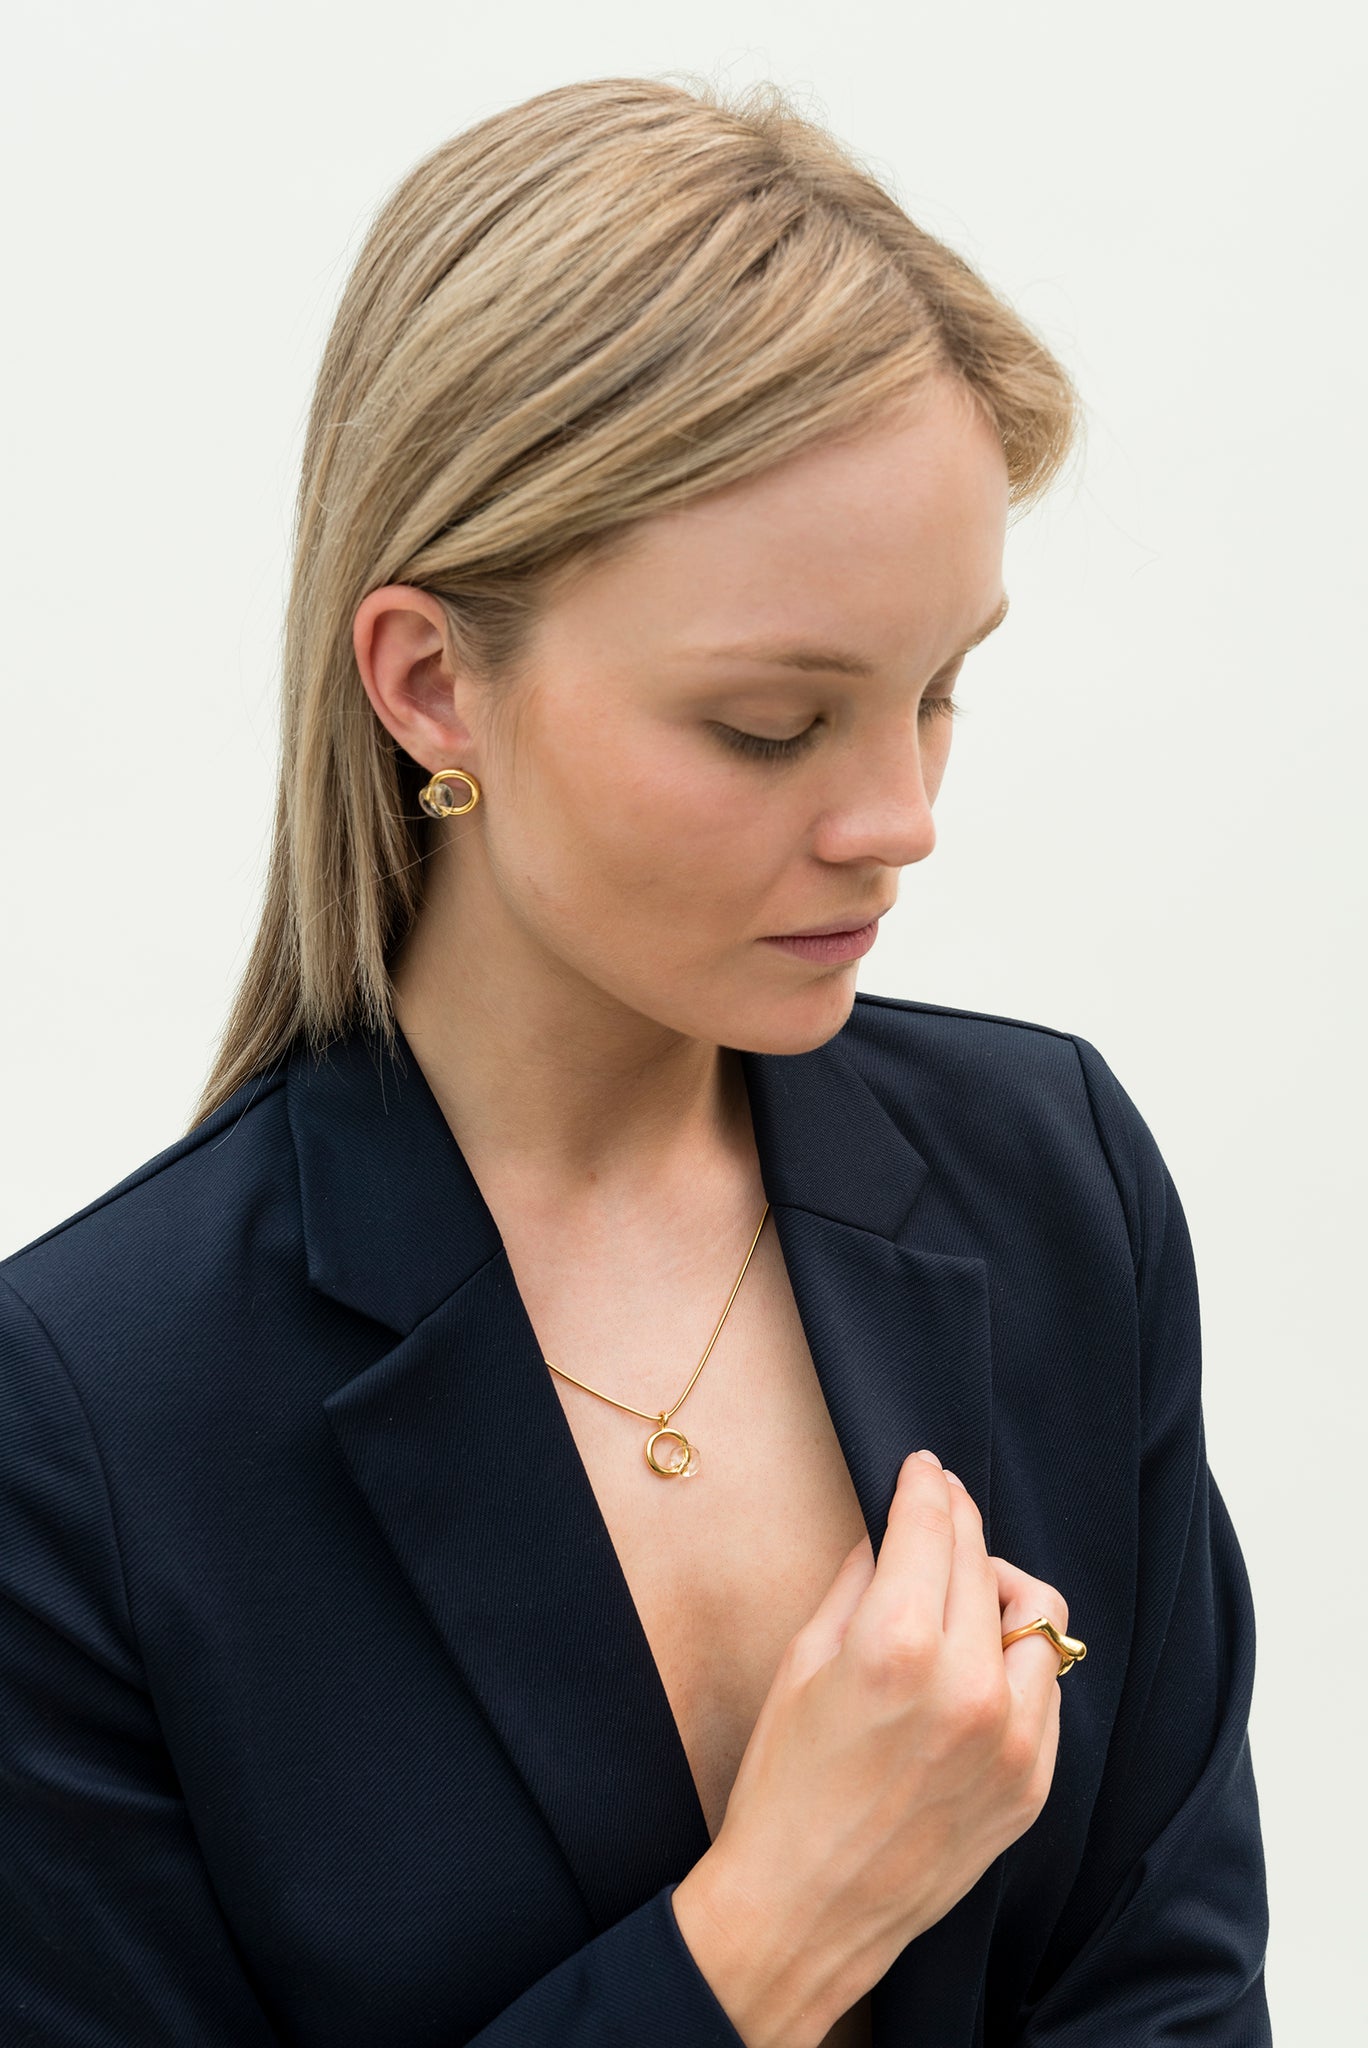 Model wearing sustainable jewelry made from recycled silver 